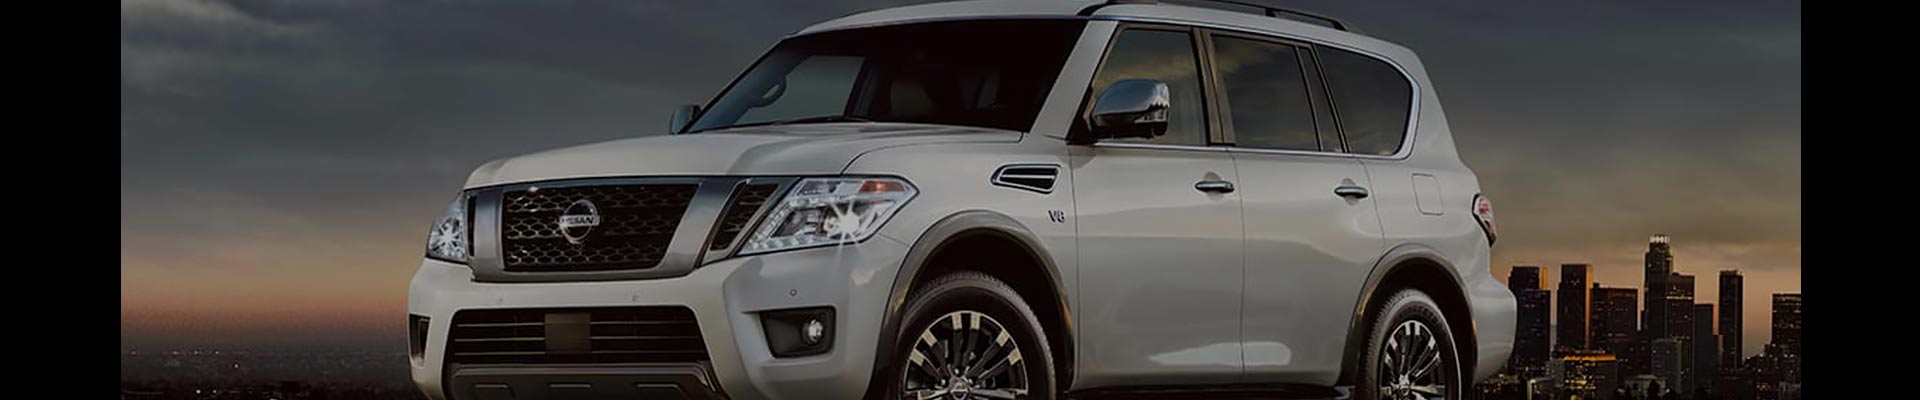 Shop Replacement and OEM 2006 Nissan Armada Parts with Discounted Price on the Net